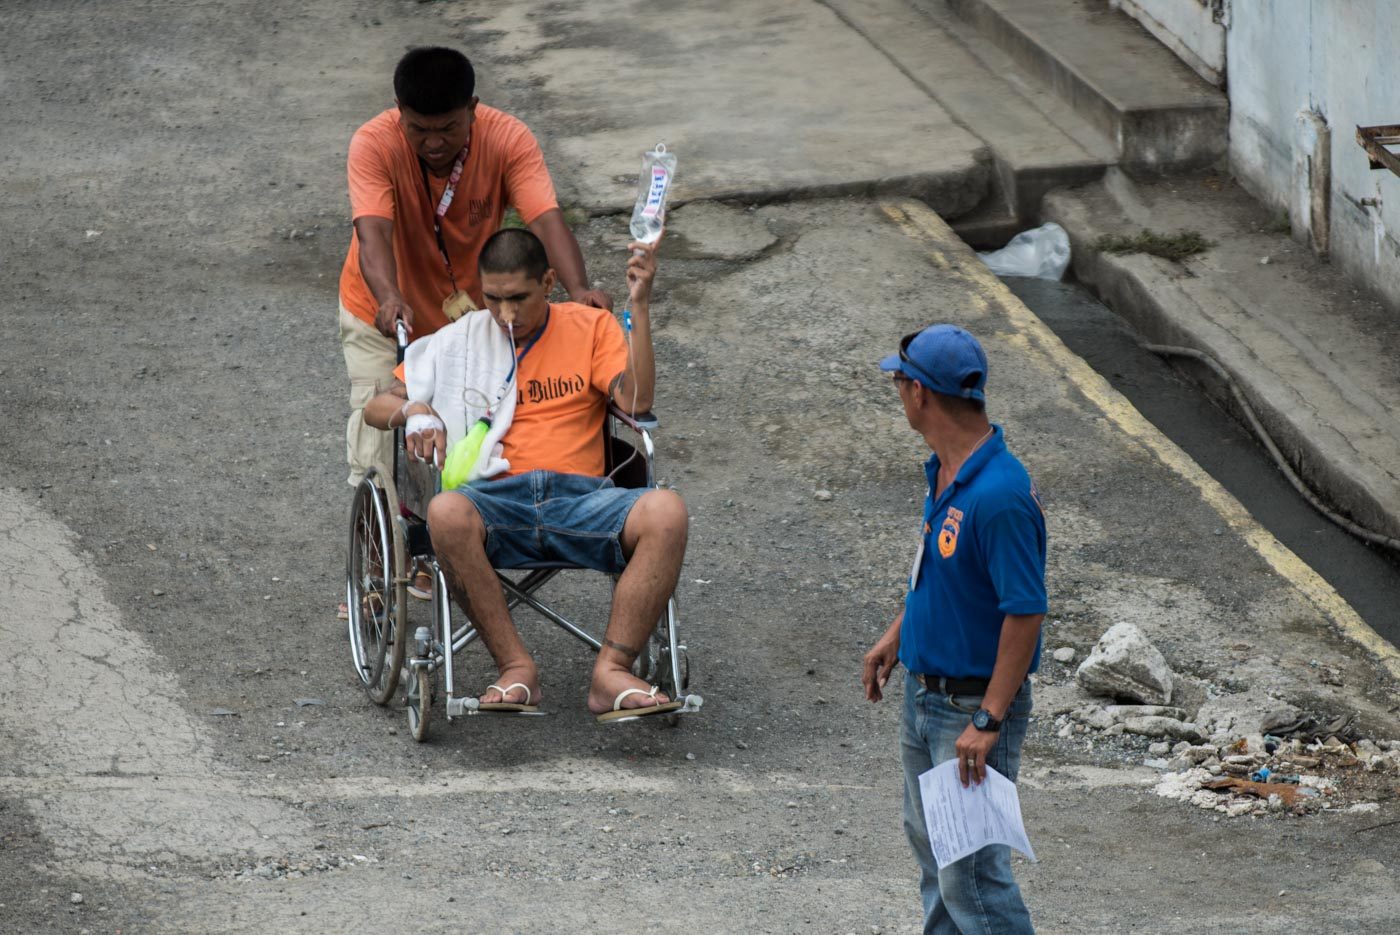 MEDICAL CARE NEEDED. A sick inmate's wheelchair is being pushed by another prisoner under the heat of the sun. Photo by Lisa Marie David/Rappler
 